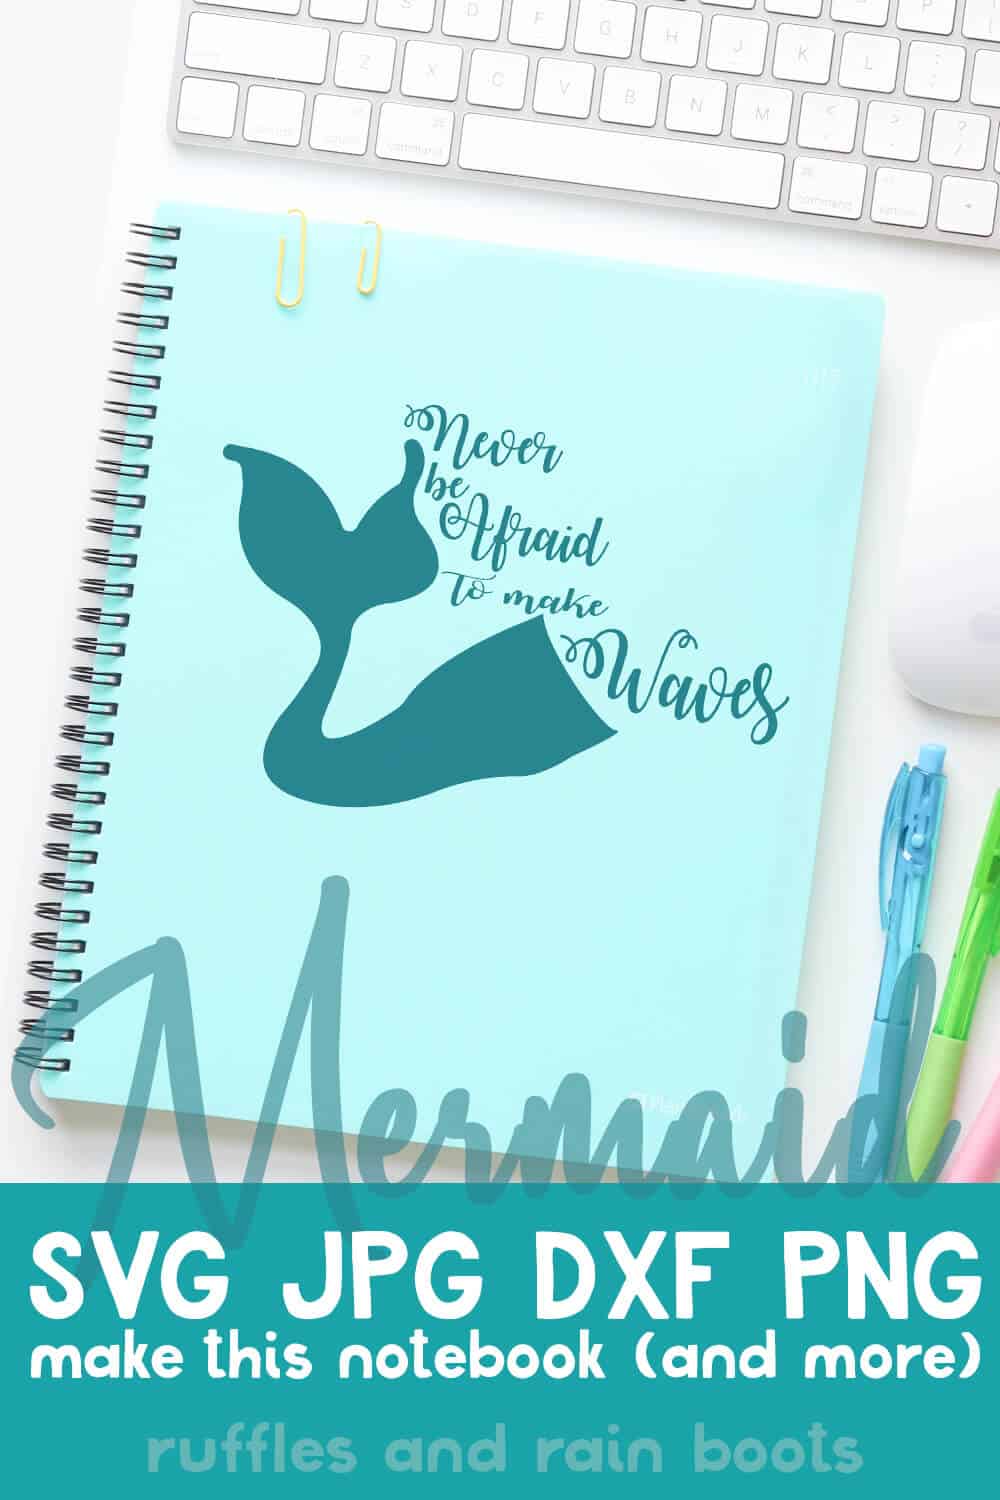 never be afraid to make waves free downloadable mermaid cut file on a blue notebook with other items on a white desk with txt which reads mermaid svg jpg dxf png